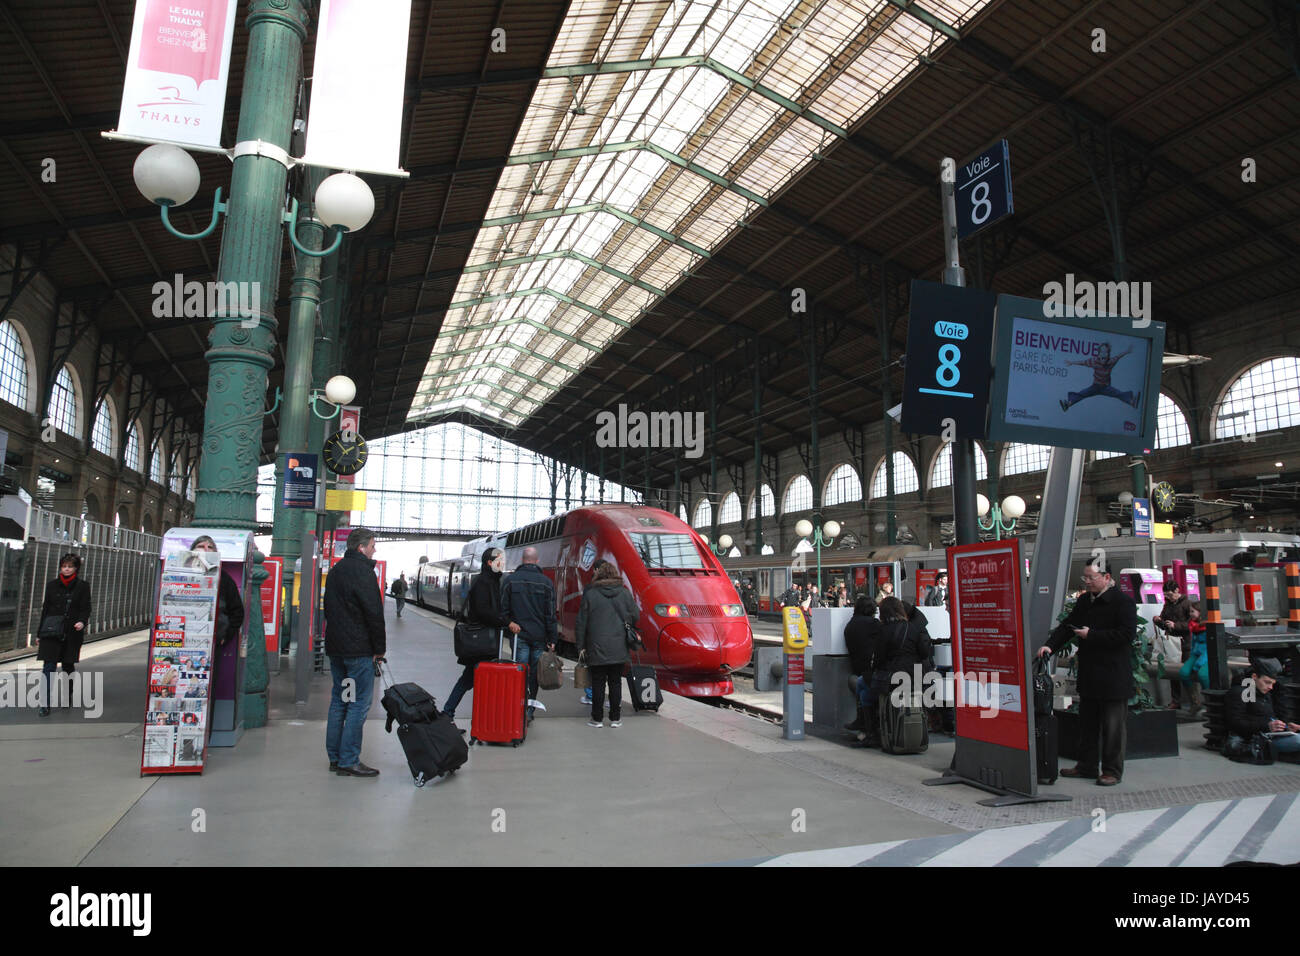 Platform 8 at the Gare du Nord, the railway station for travellers on Eurostar and to northern France. Stock Photo